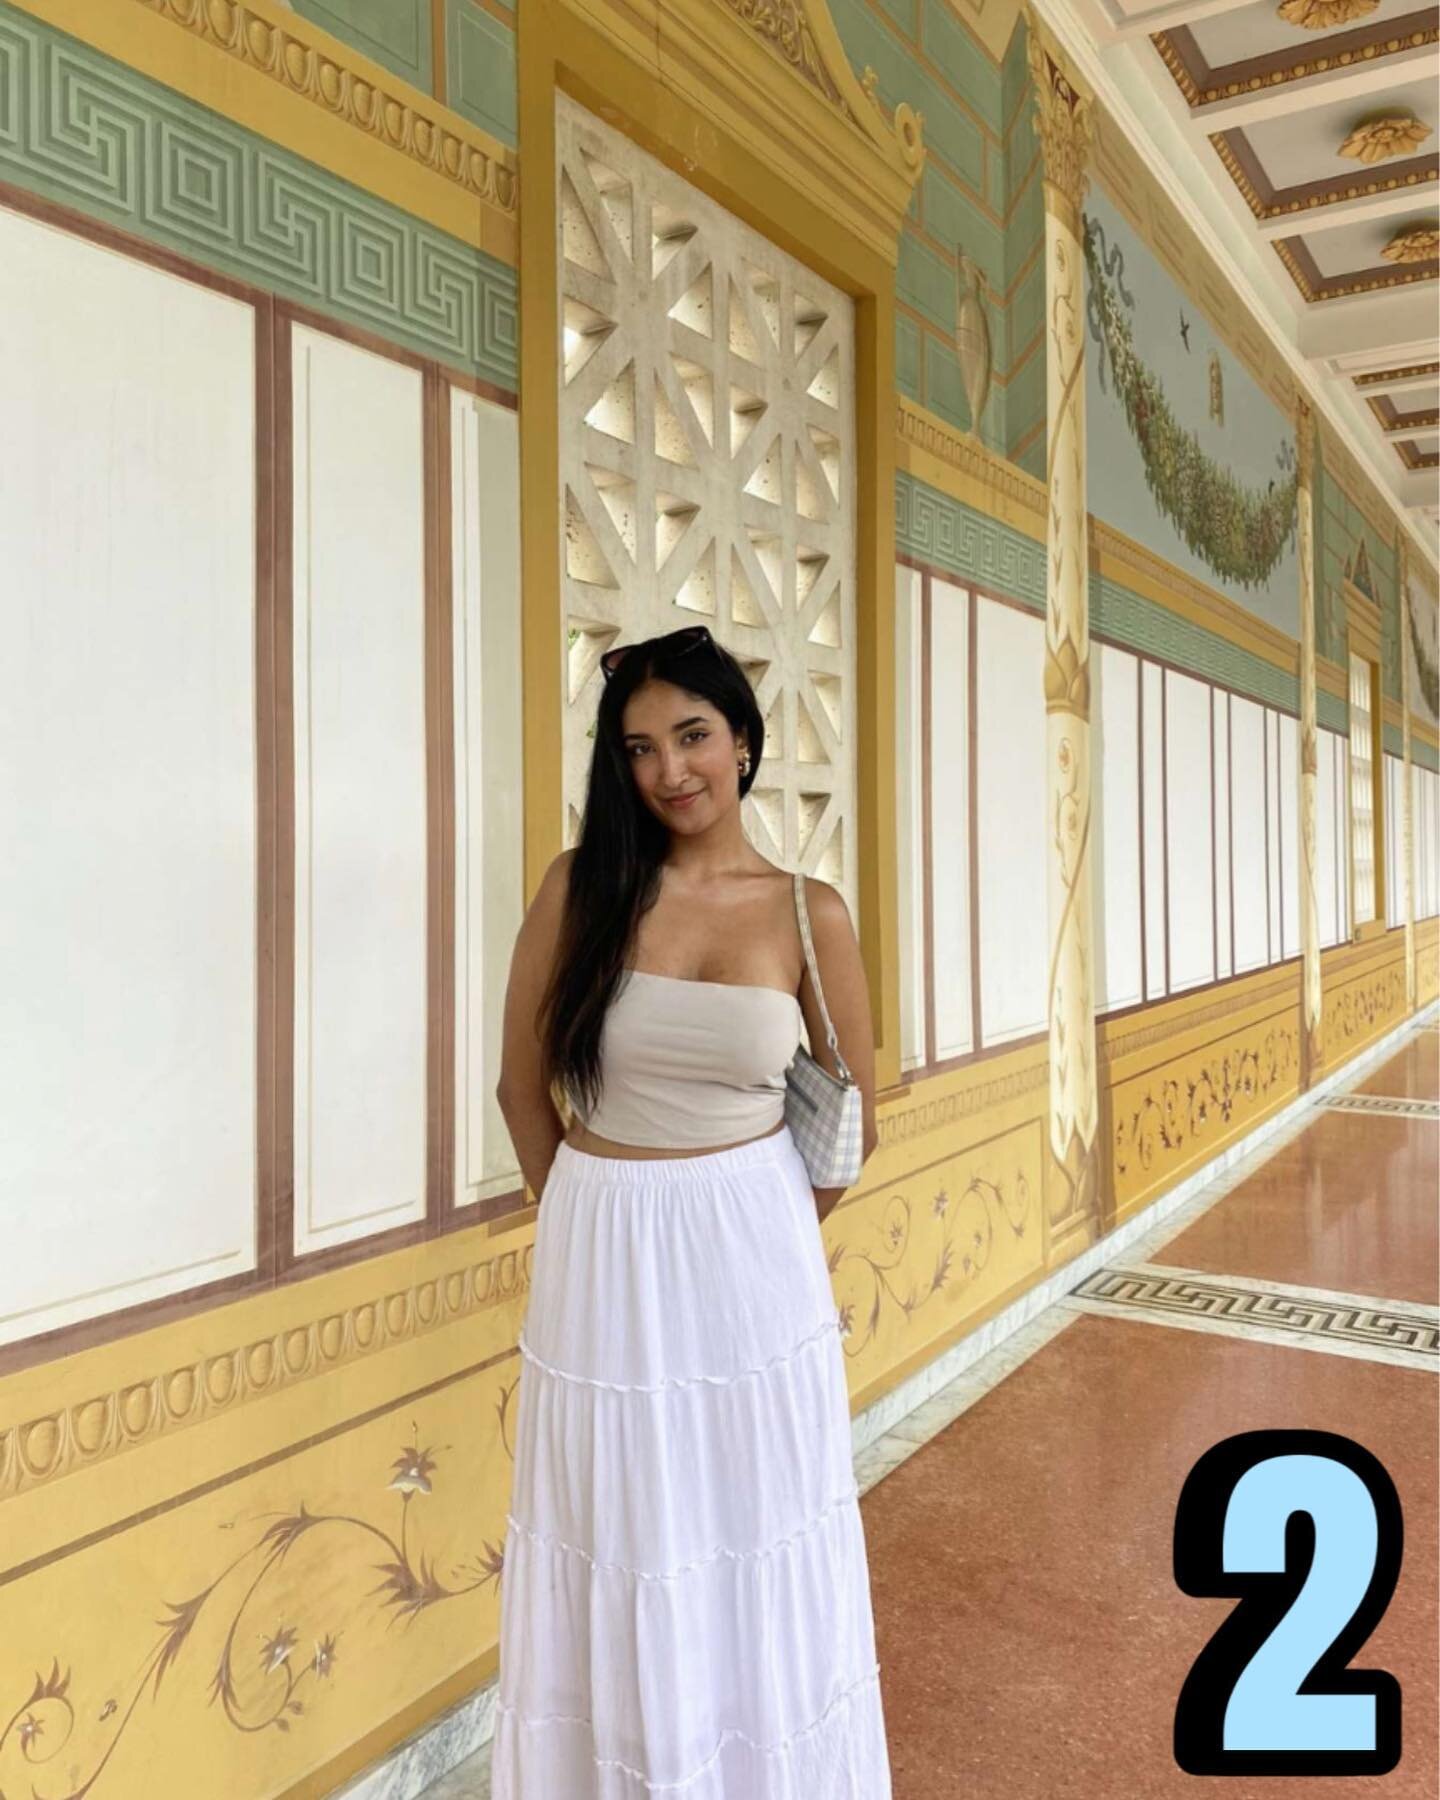 Hope everyone had an amazing week 0! Now that it&rsquo;s over, it means there are 2 days until rush!!! Up next in our countdown is Sahiba Grewal. Sahiba is a 4th year from Huntington Beach, CA. She is majoring in Political Science &amp; Anthropology 